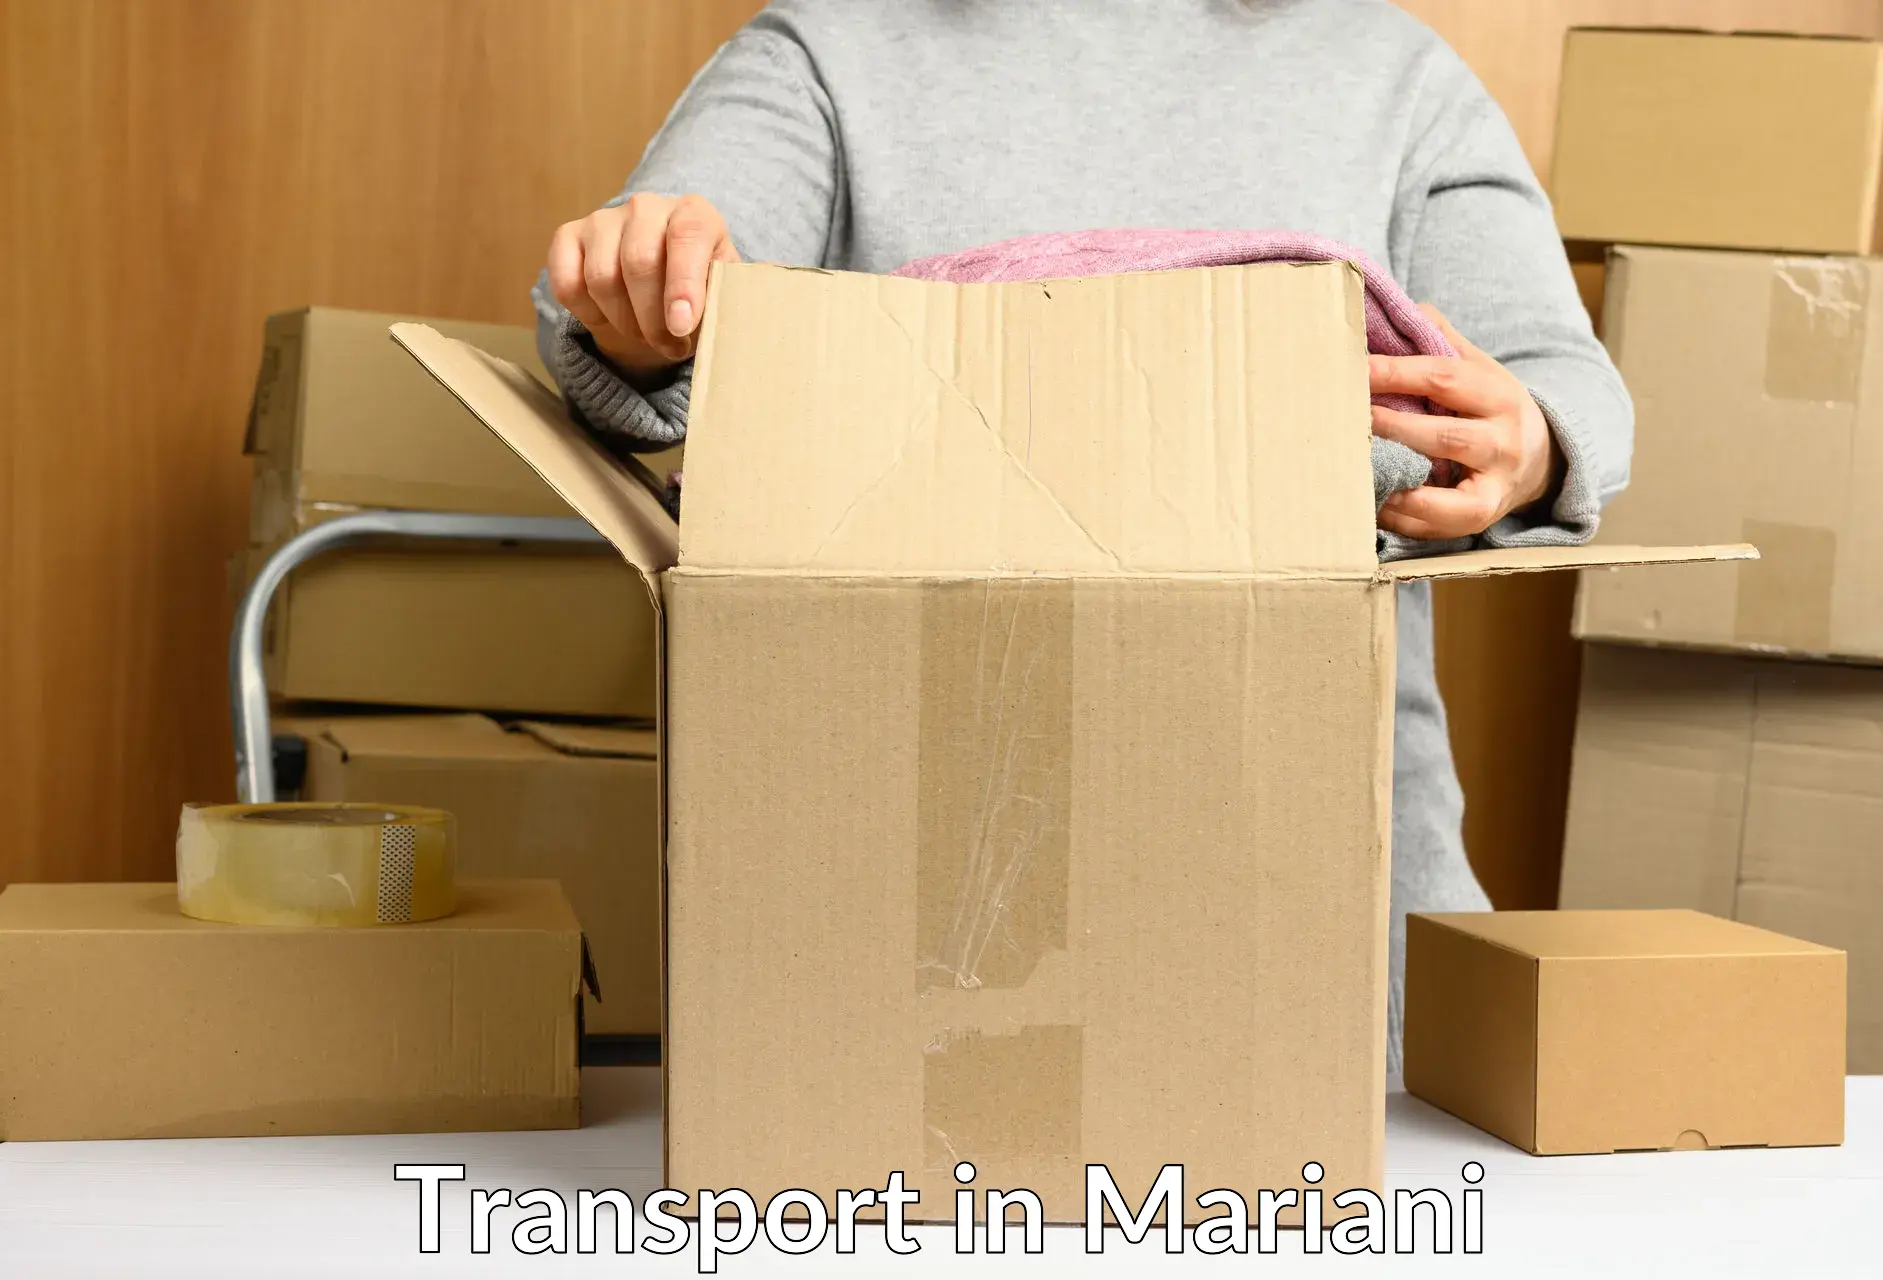 Pick up transport service in Mariani